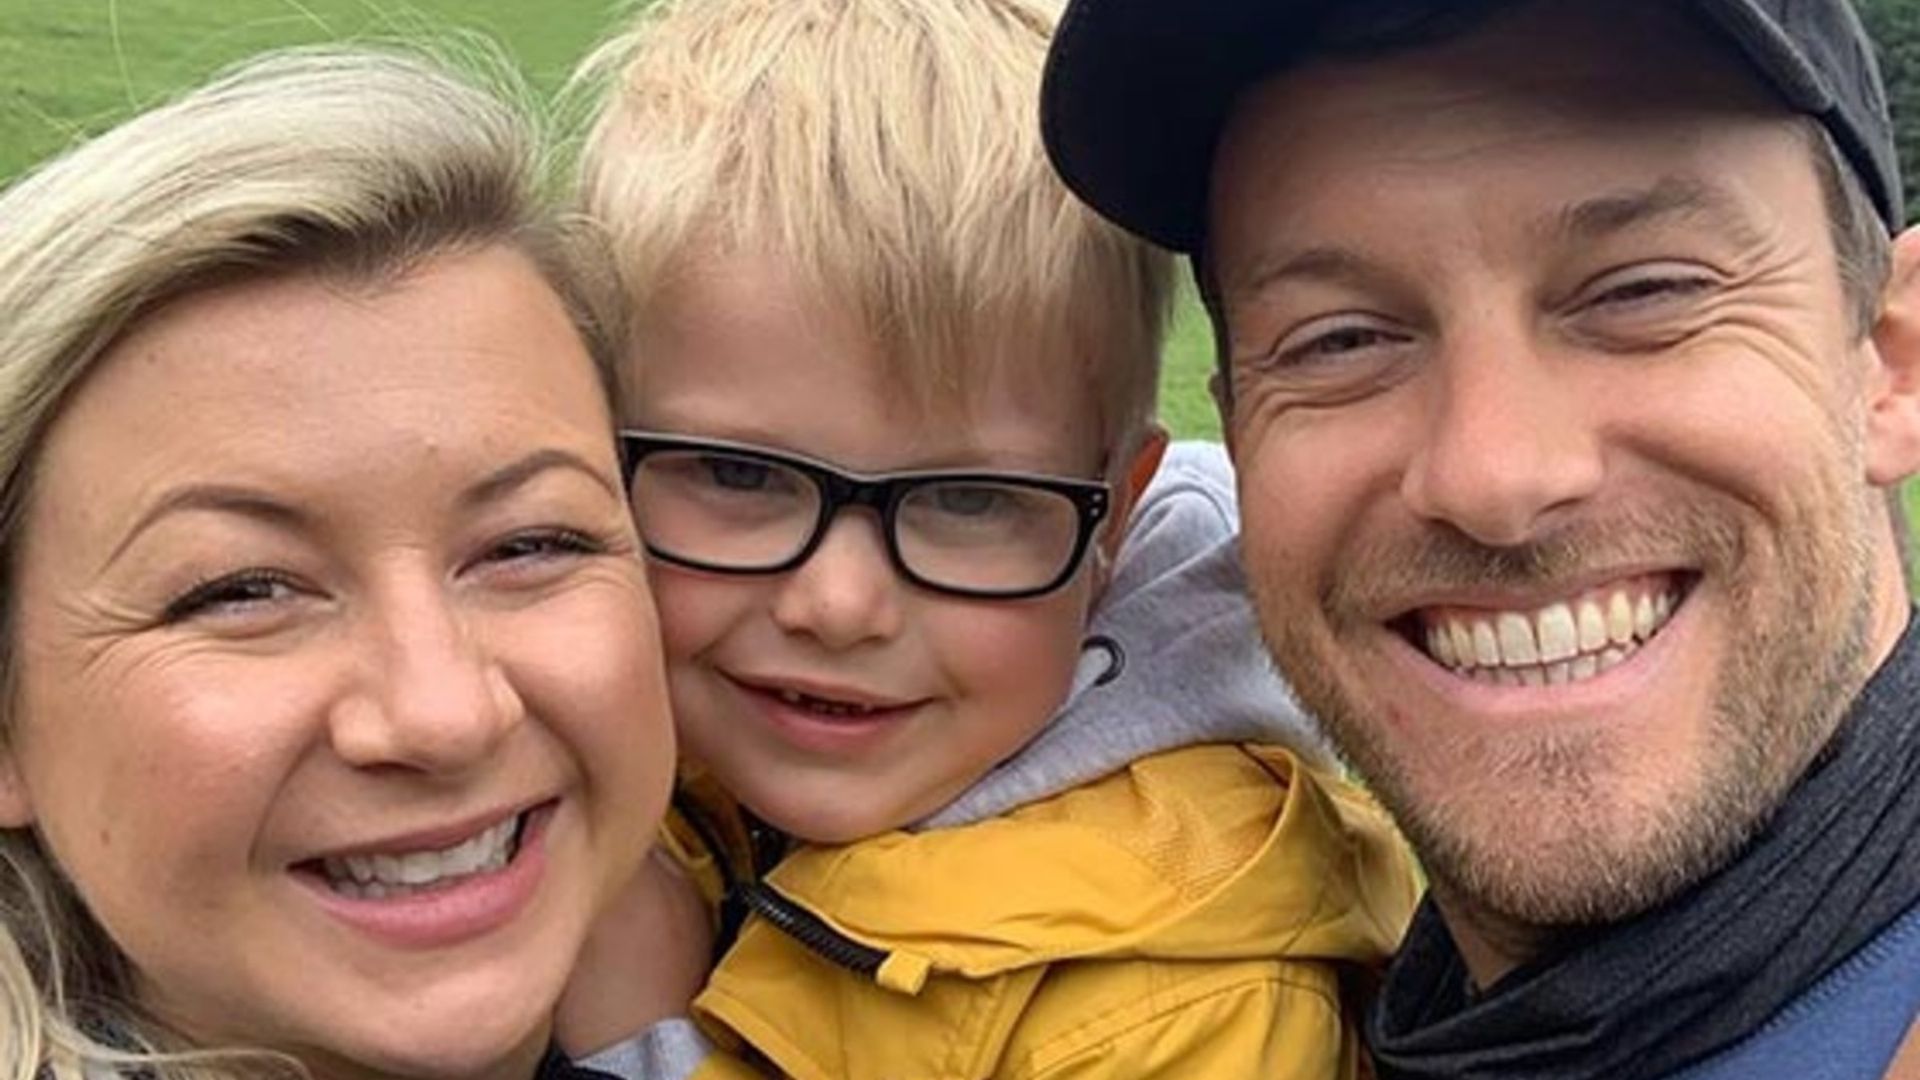 Chris Ramsey's wife Rosie expresses 'agony' in heartfelt post after birth of second child